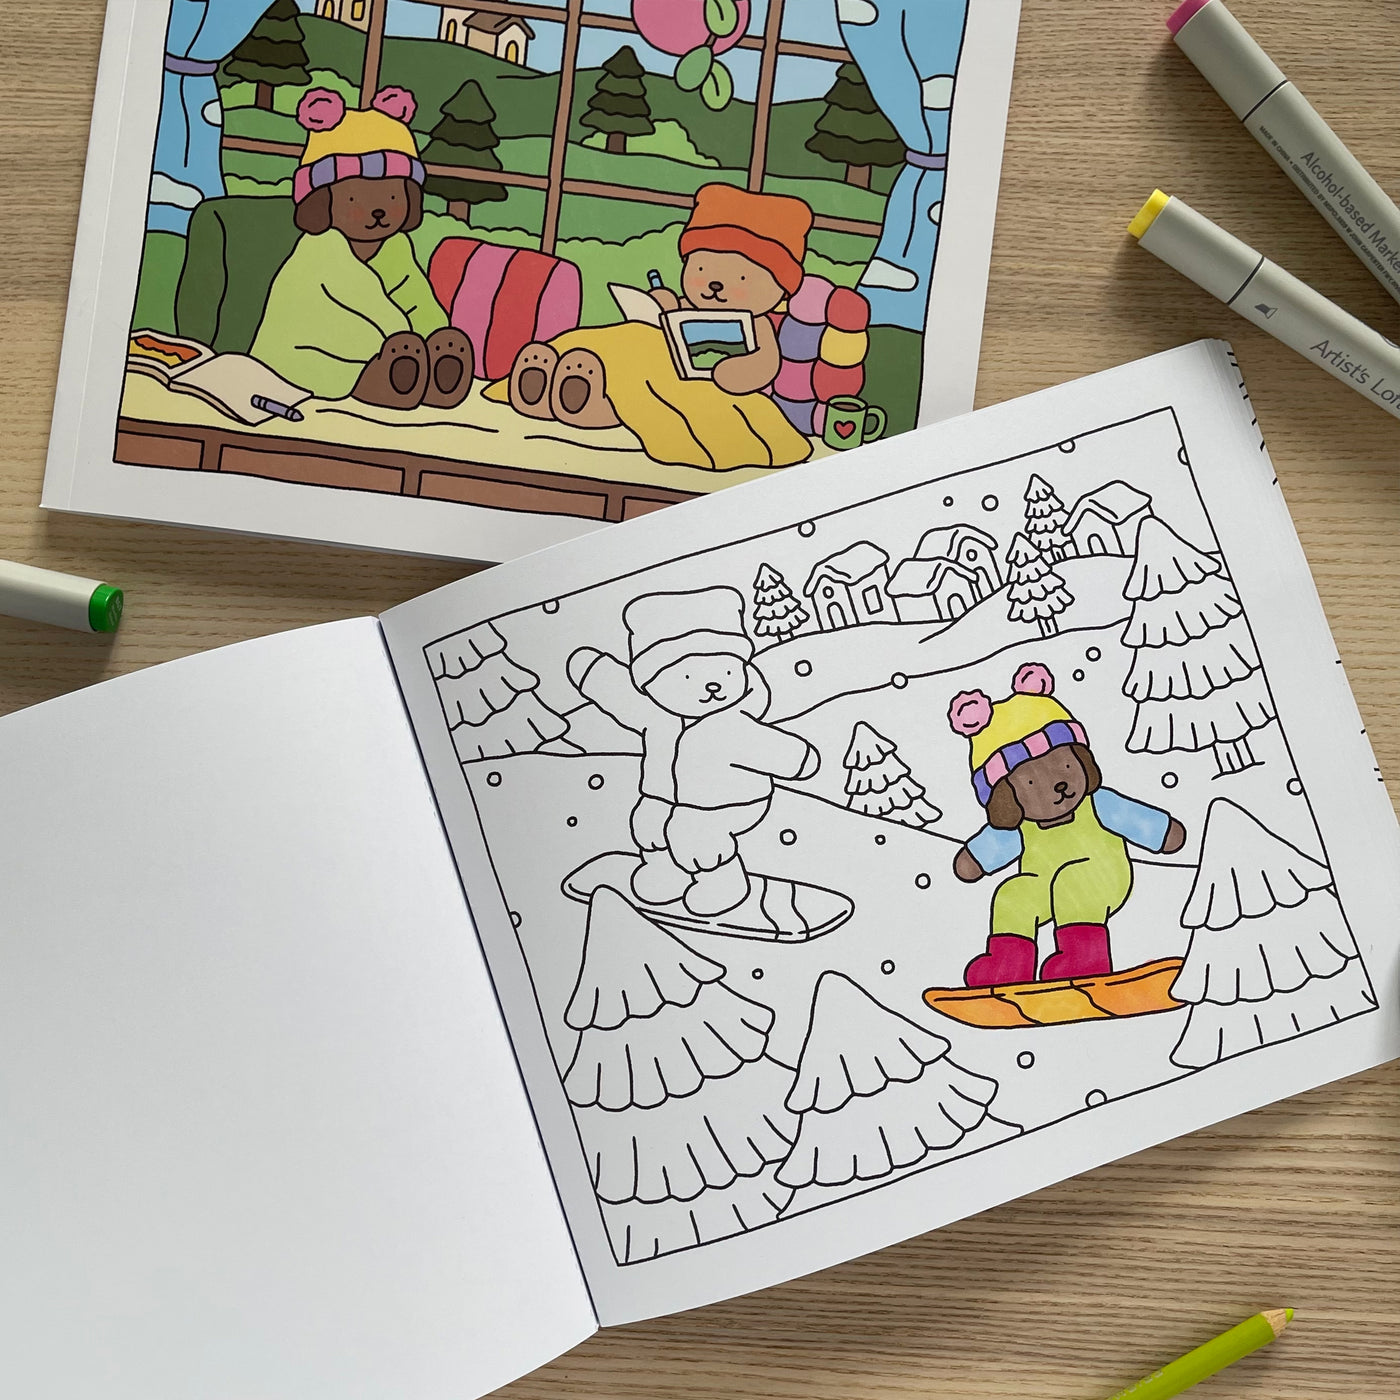 bobbiie Goods coloring book: Offers hours of enjoyment and